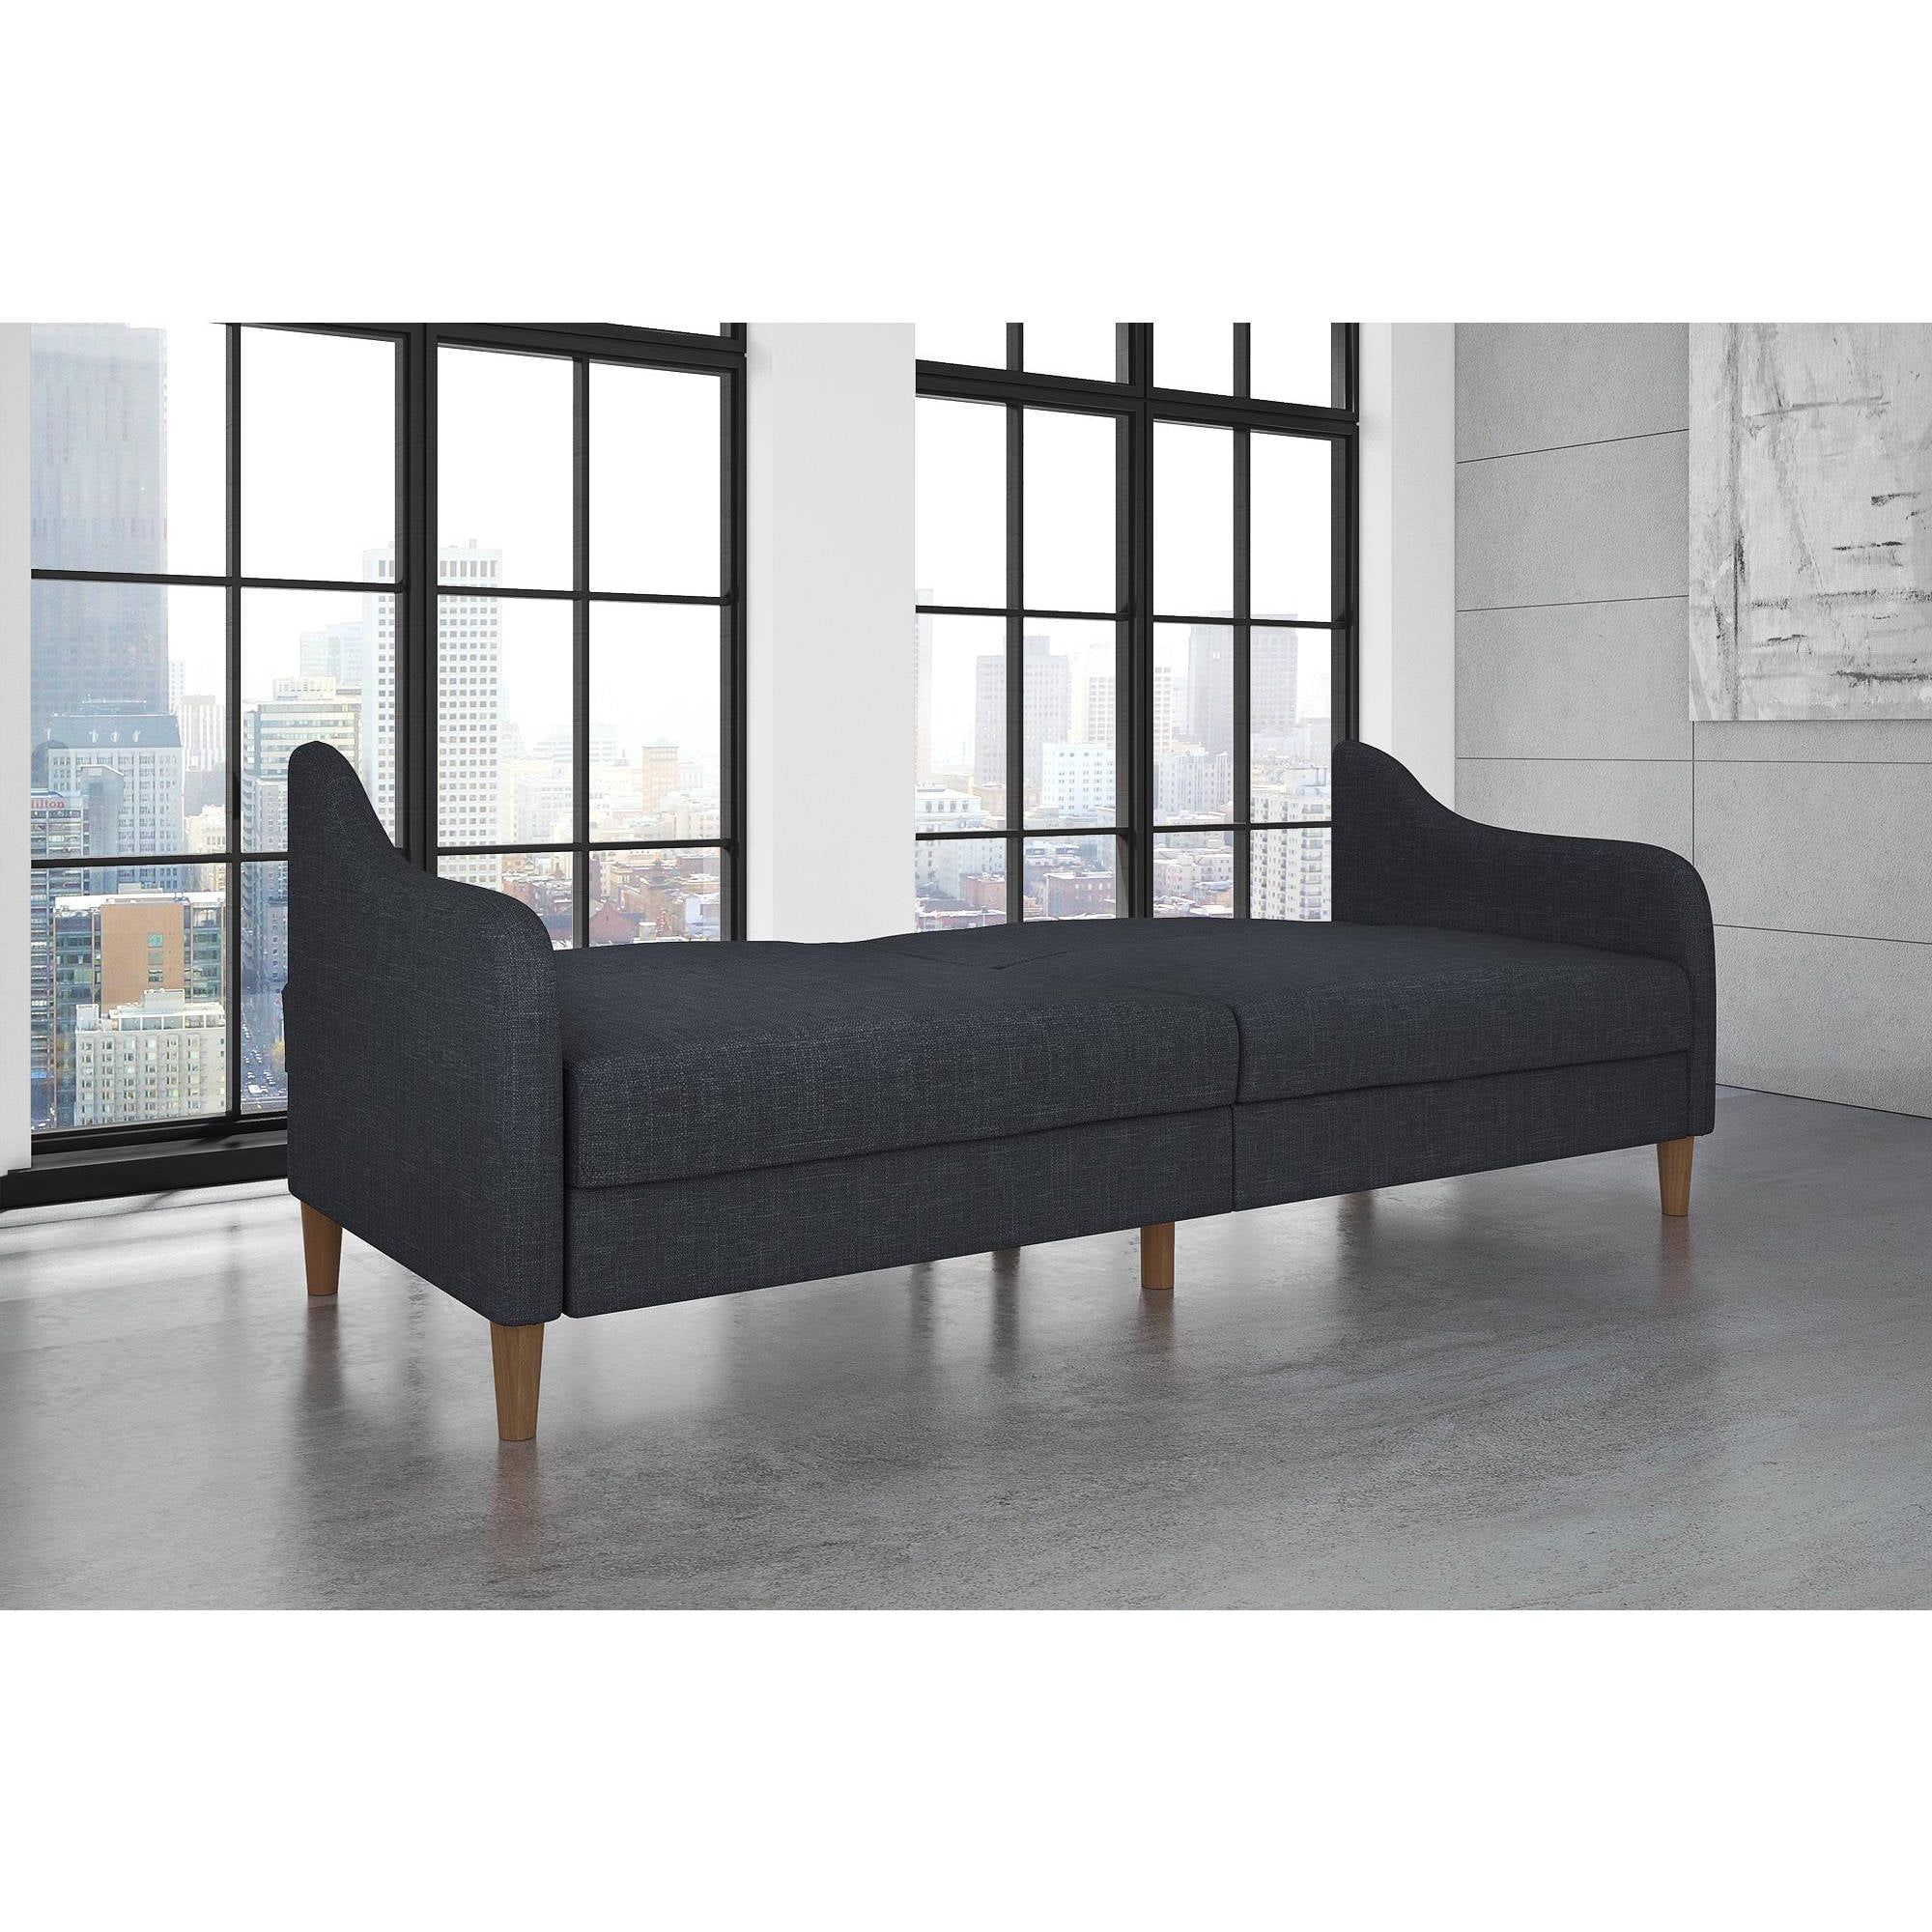 Convertible Jasper Coil Sofa Sleeper Futon Navy Linen Upholstery Couch With Navy Linen Coil Sofas (Gallery 1 of 20)